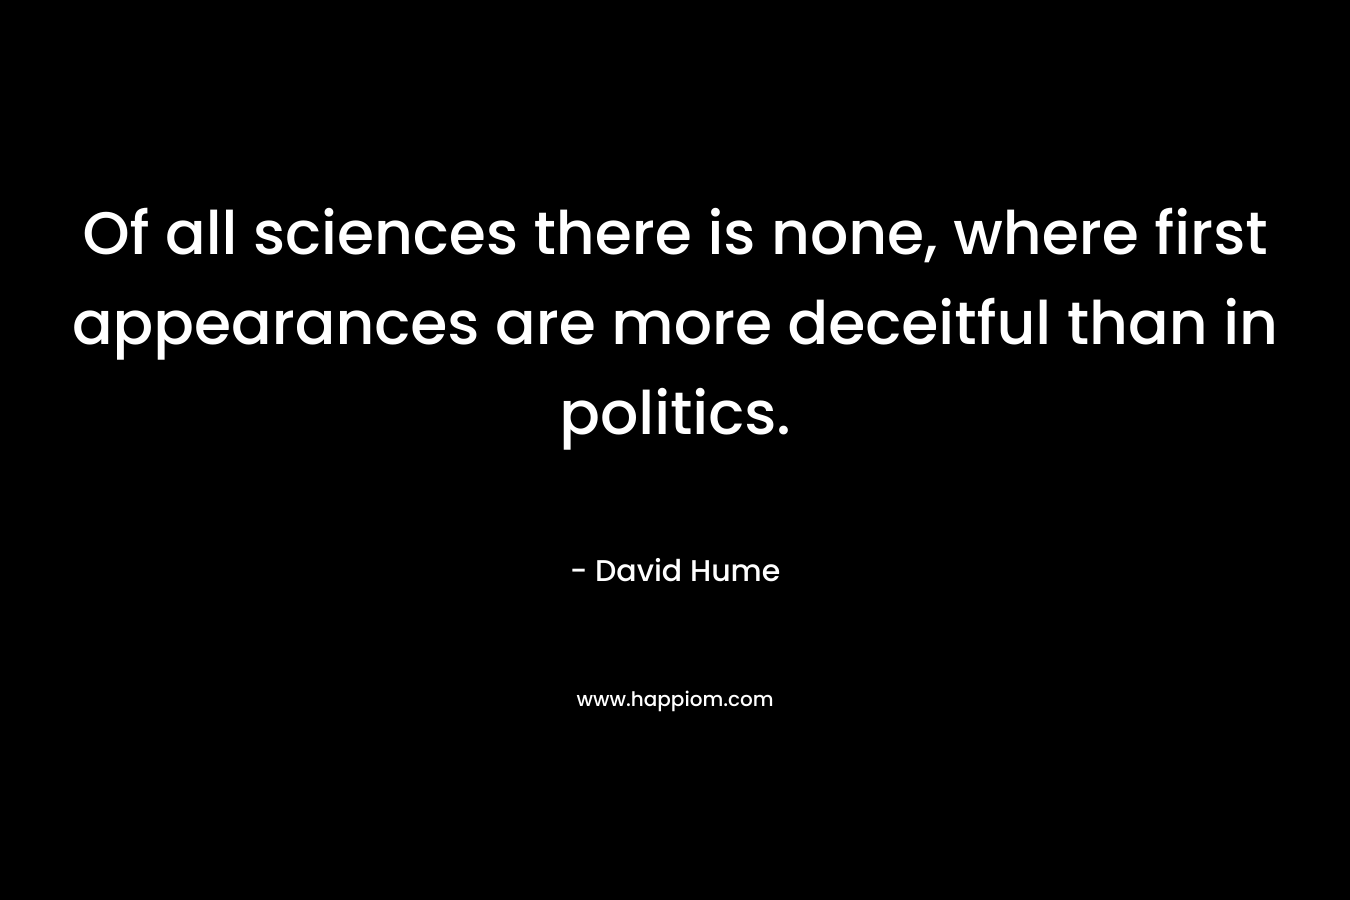 Of all sciences there is none, where first appearances are more deceitful than in politics.